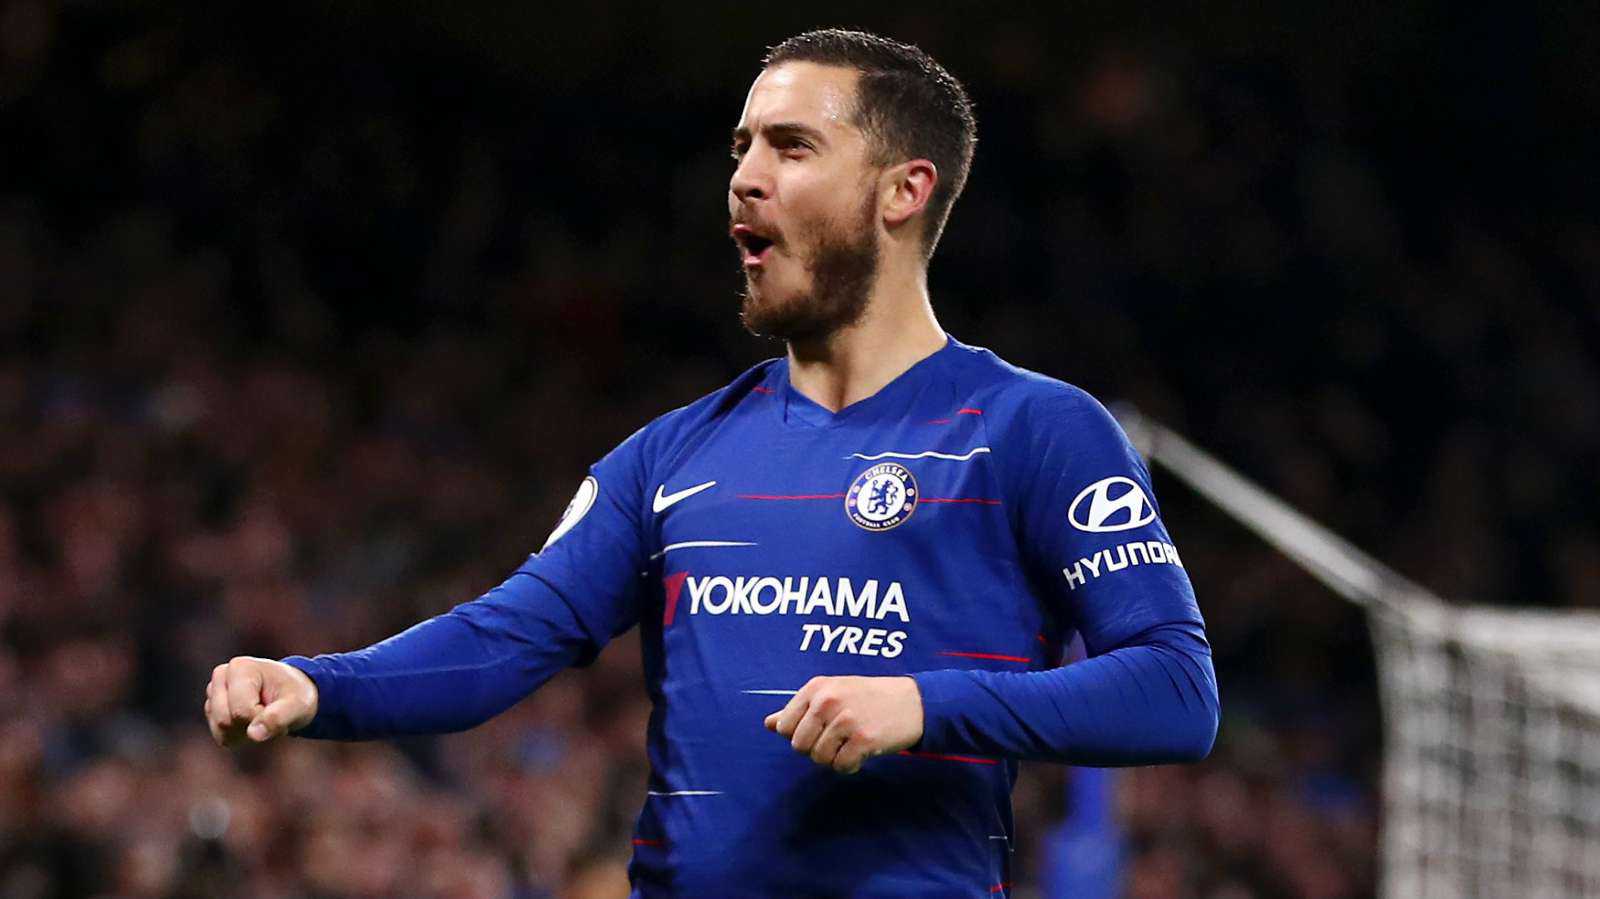 That's why Real Madrid want him! Hazard shows Galactico credentials yet again